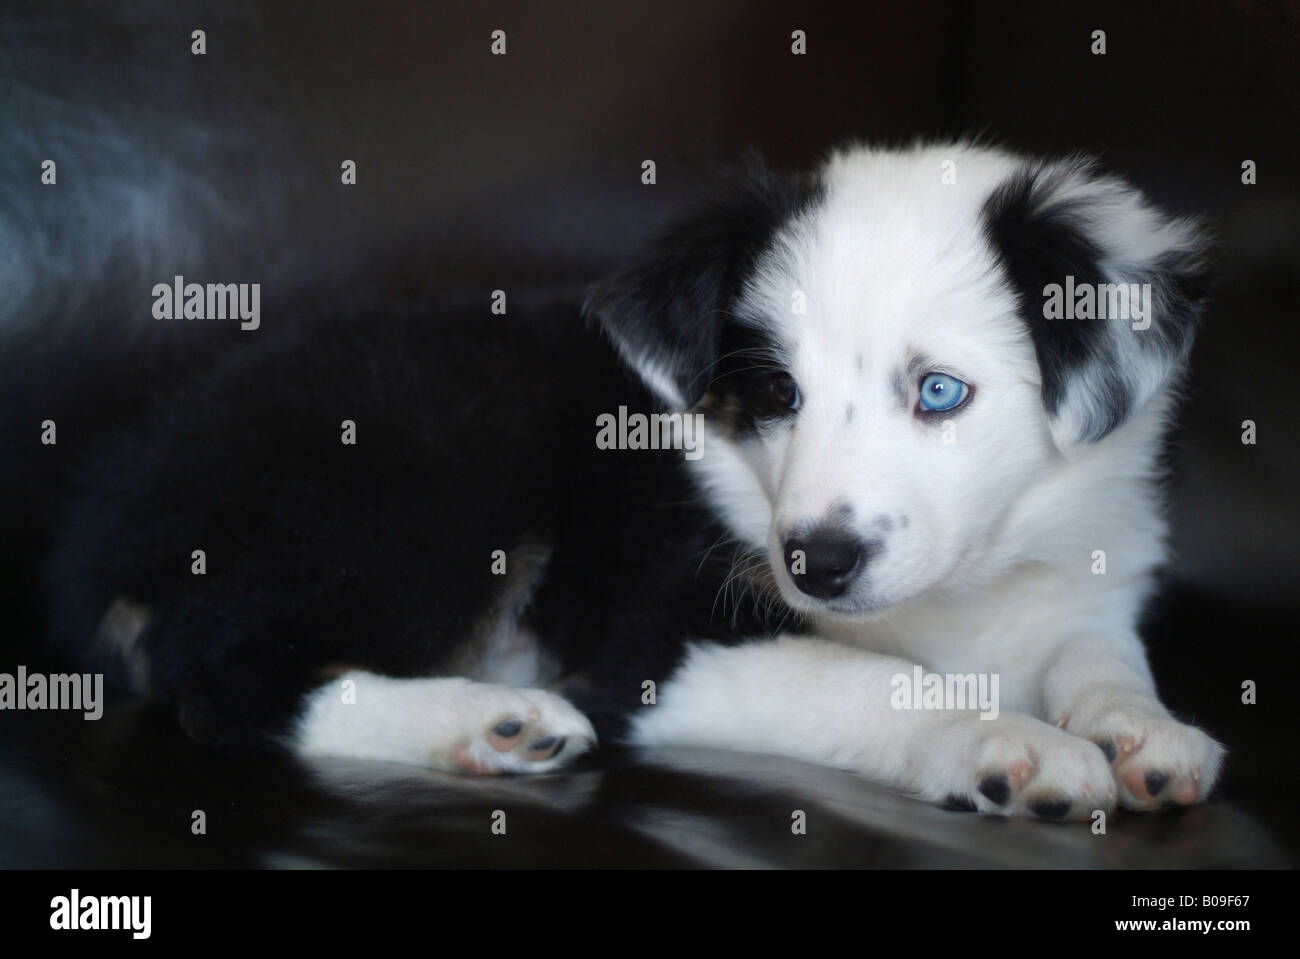 A new puppy laying down. Stock Photo